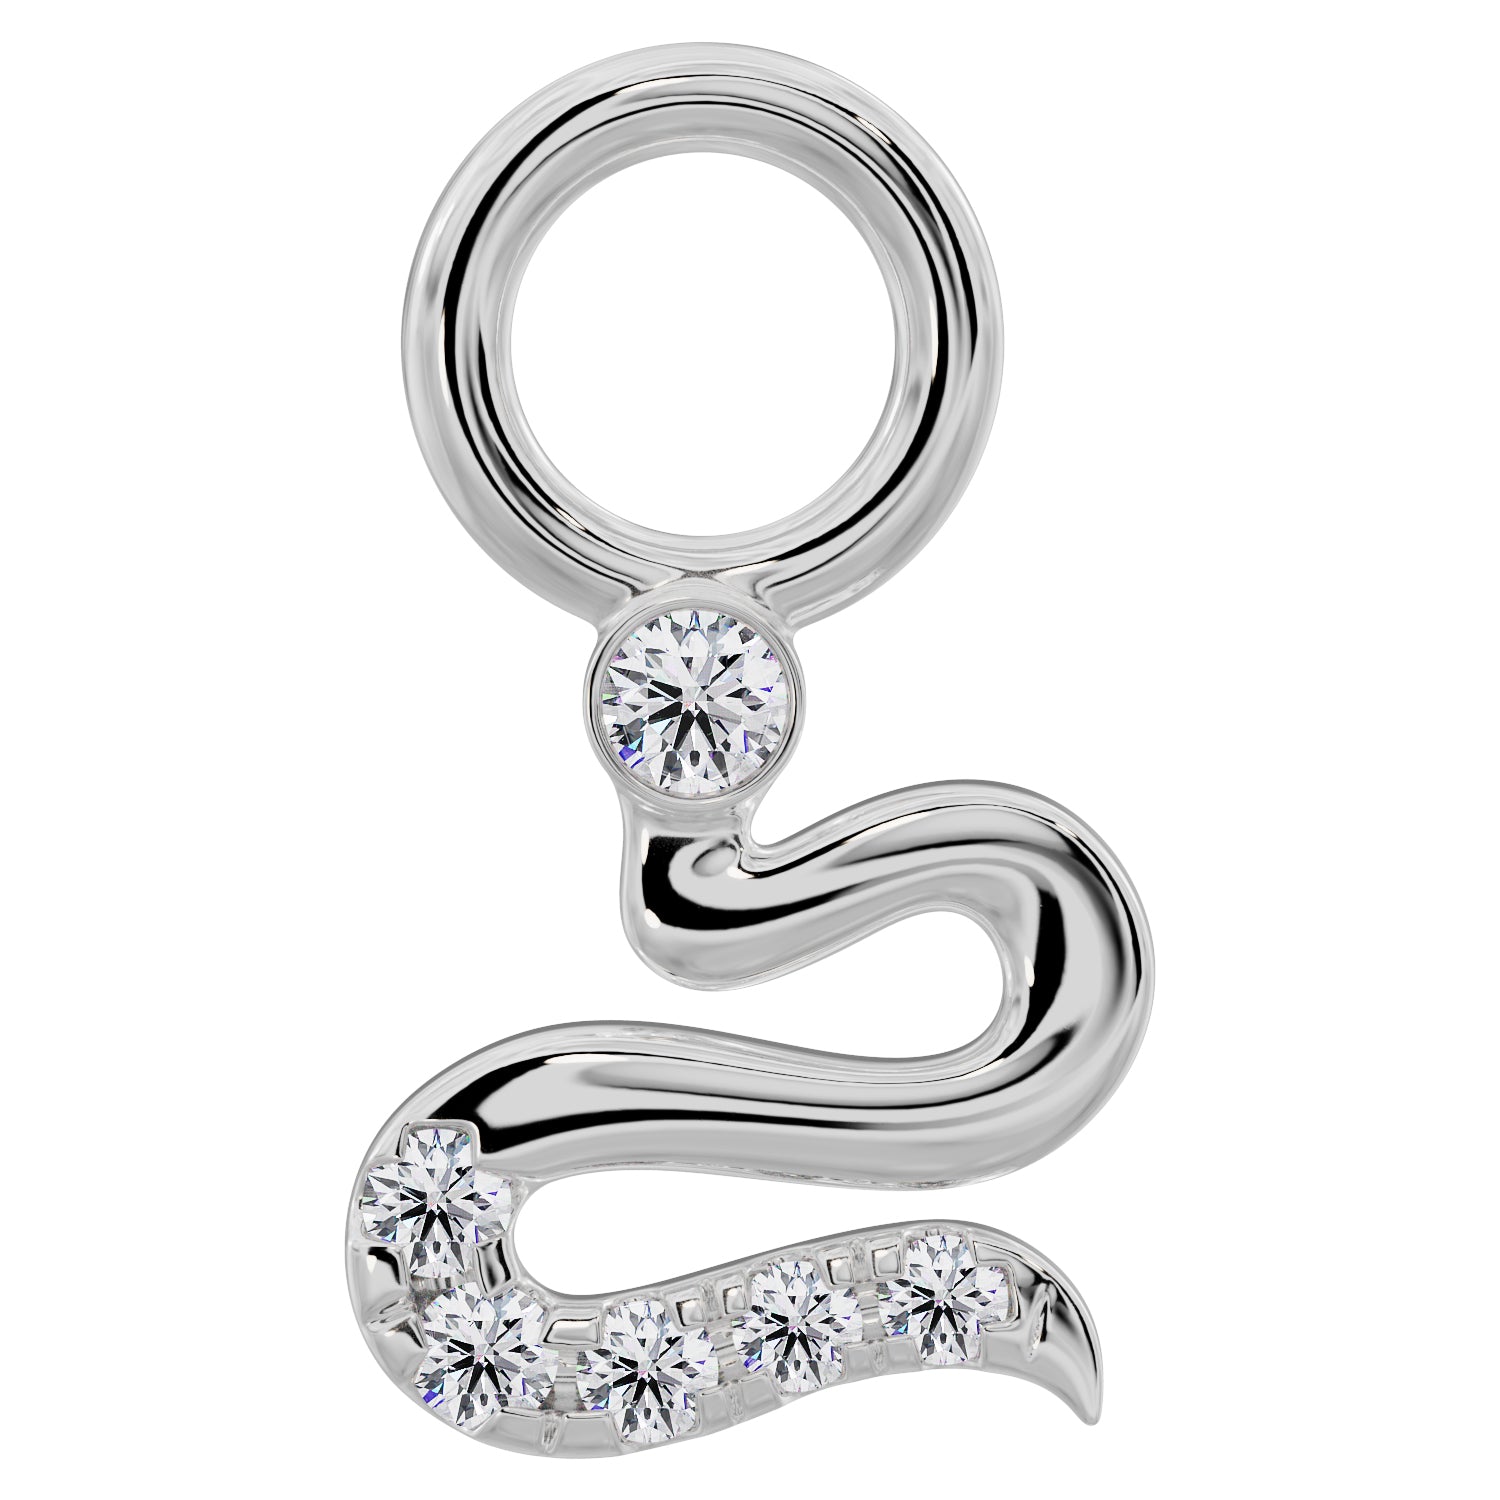 Diamond Snake Charm Accessory for Piercing Jewelry-14K White Gold